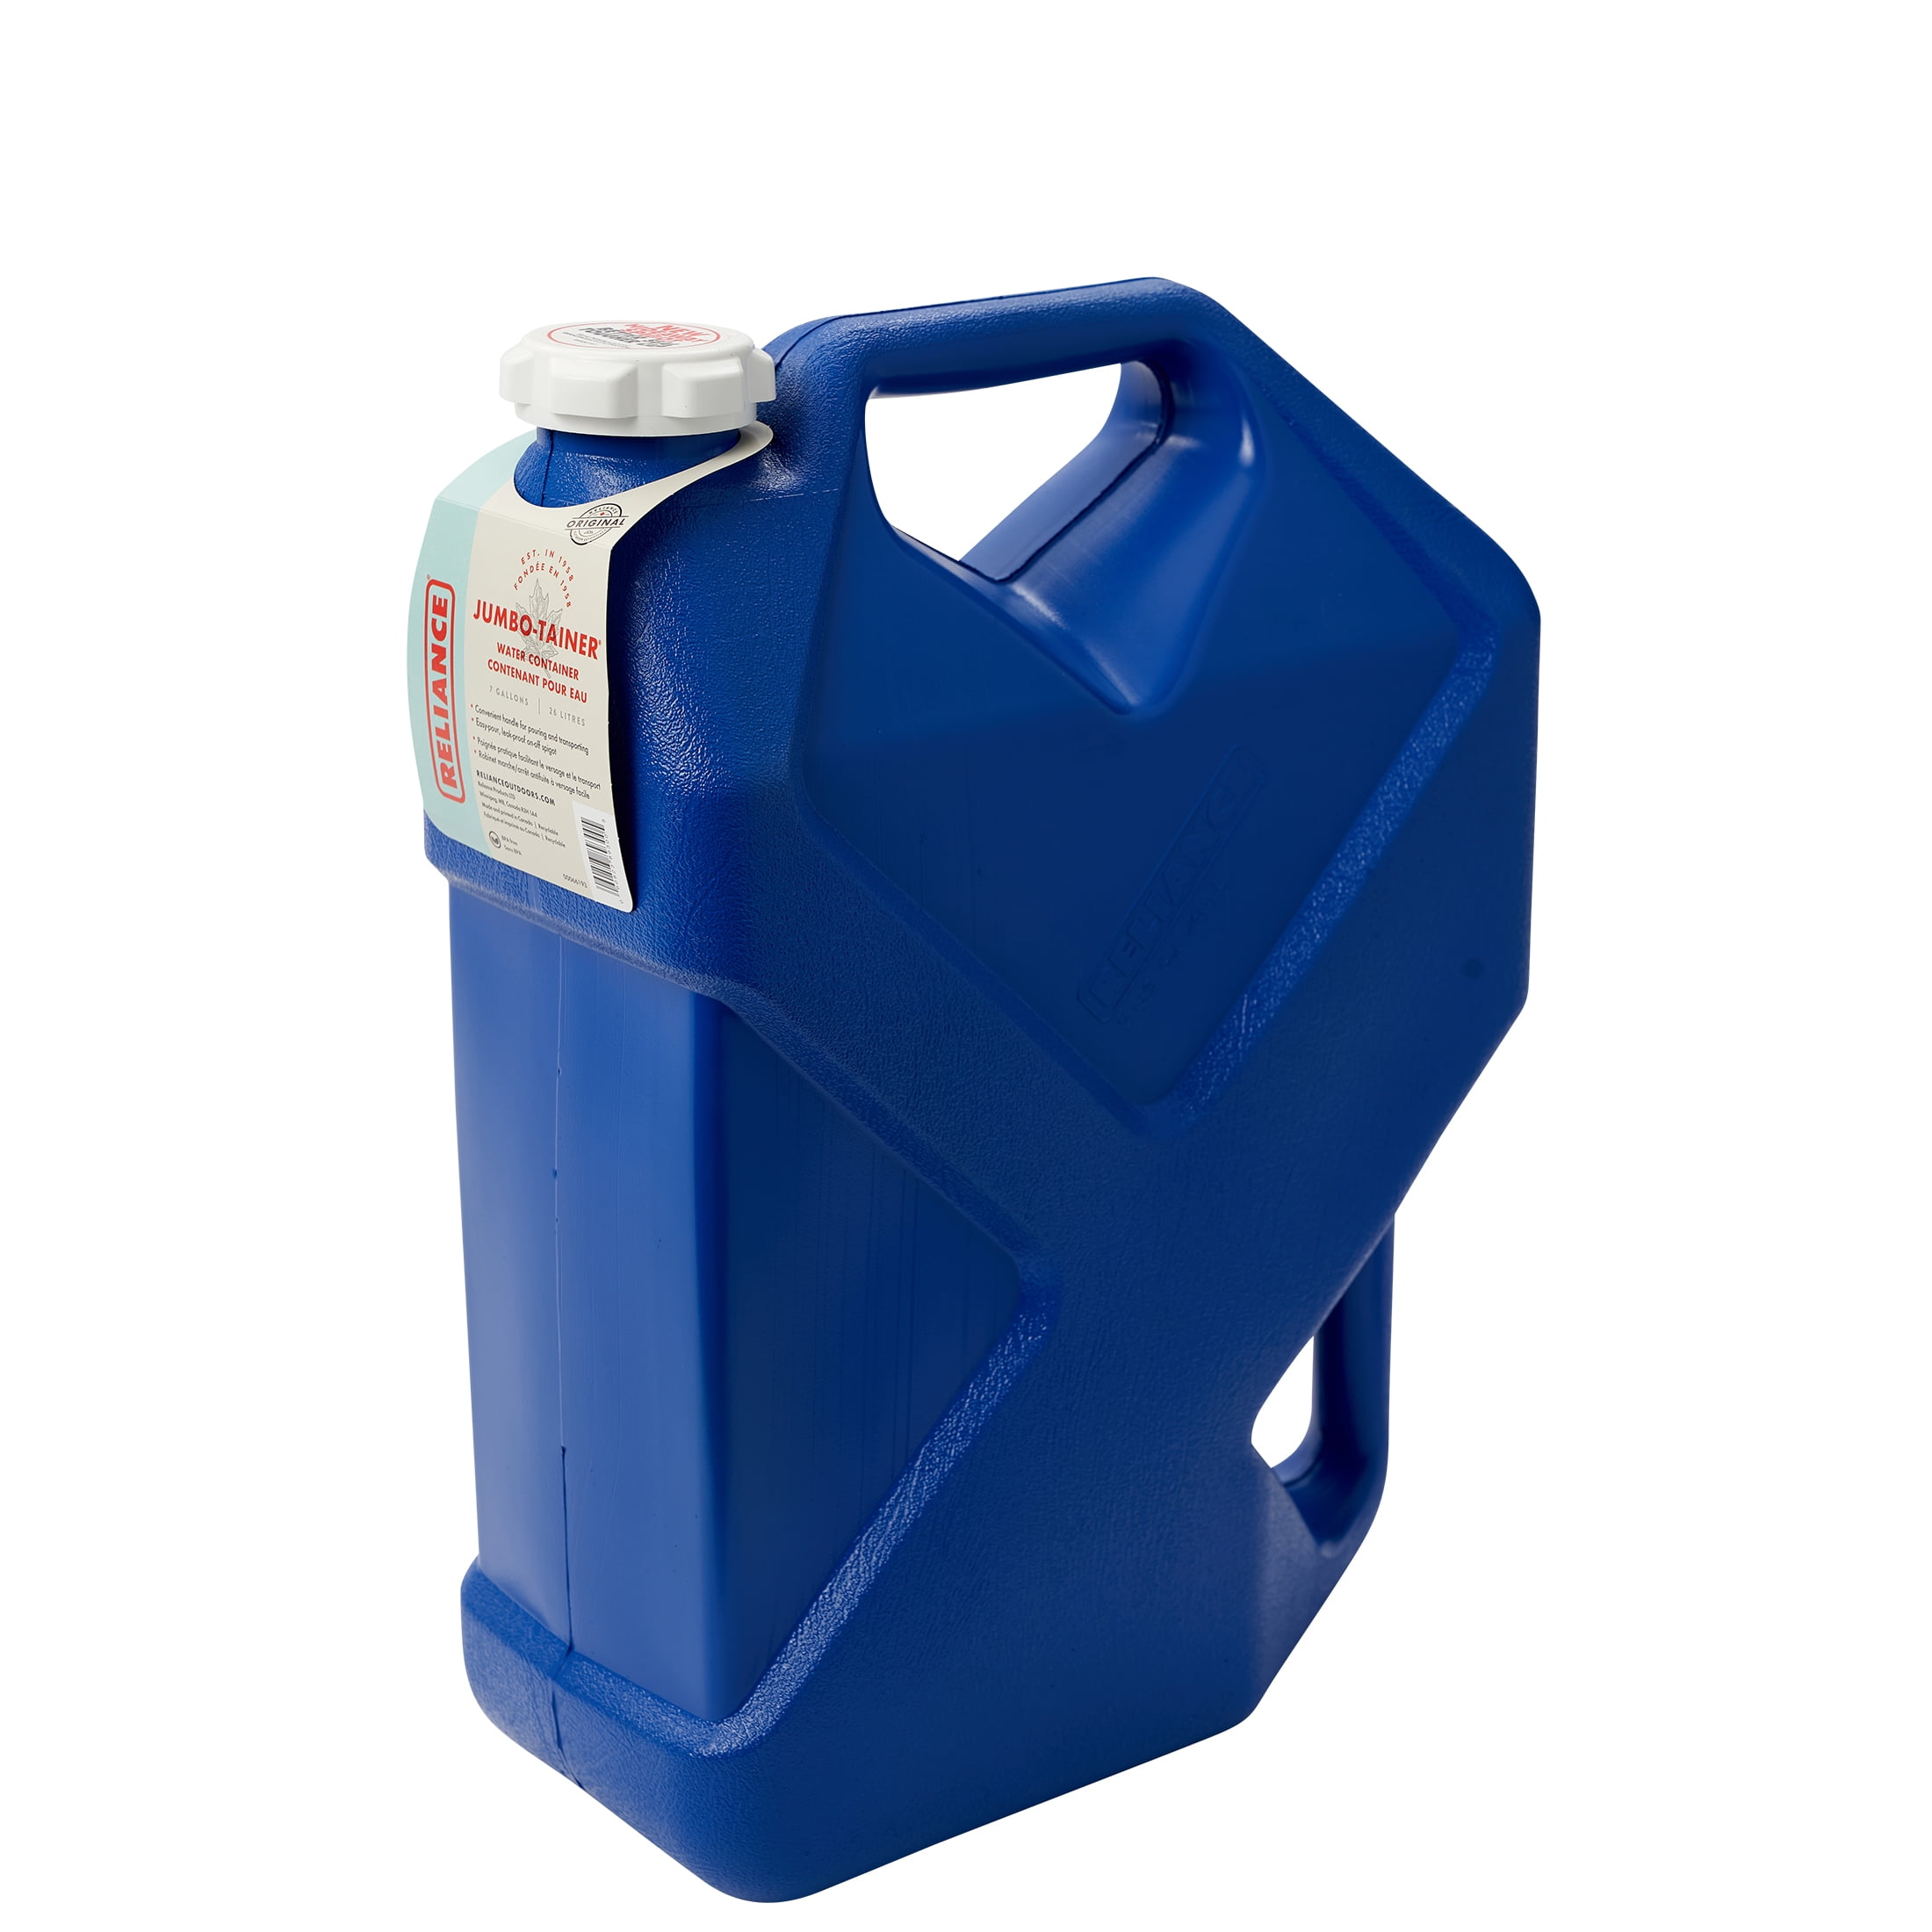 5 Gallon 20 Litre Am Green for sale online Scepter 05177 Military Water Container 